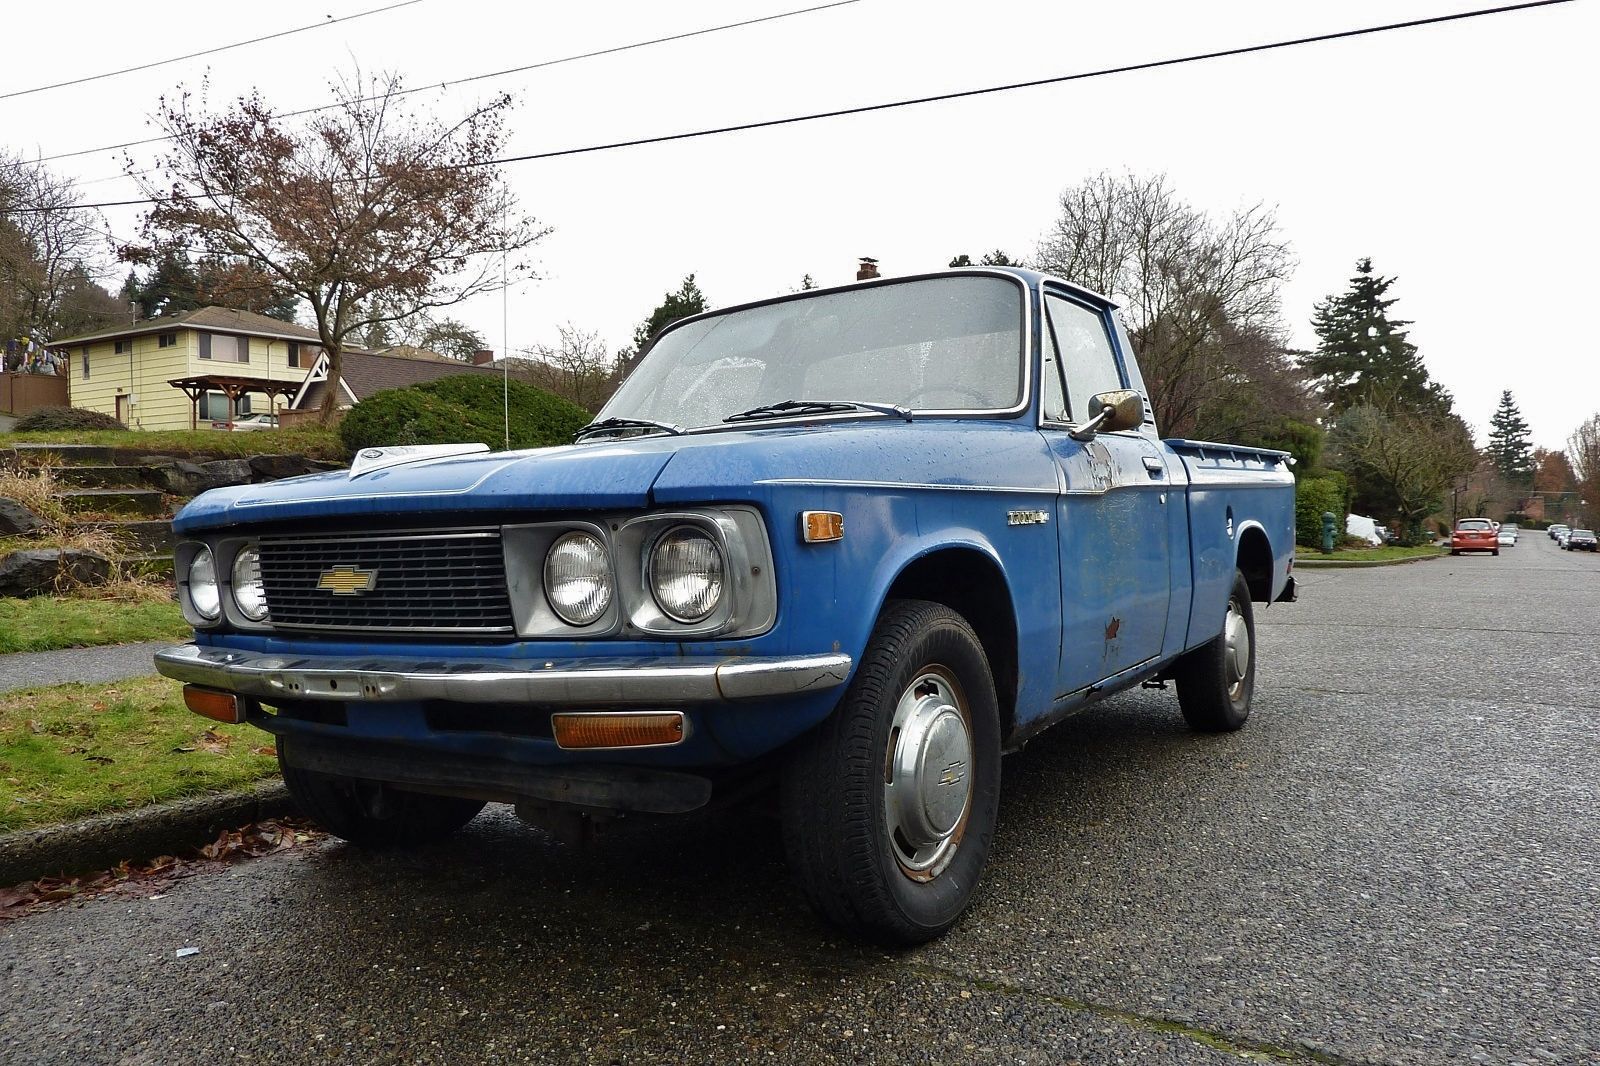 A blue Chevy LUV from 1974, outdoors